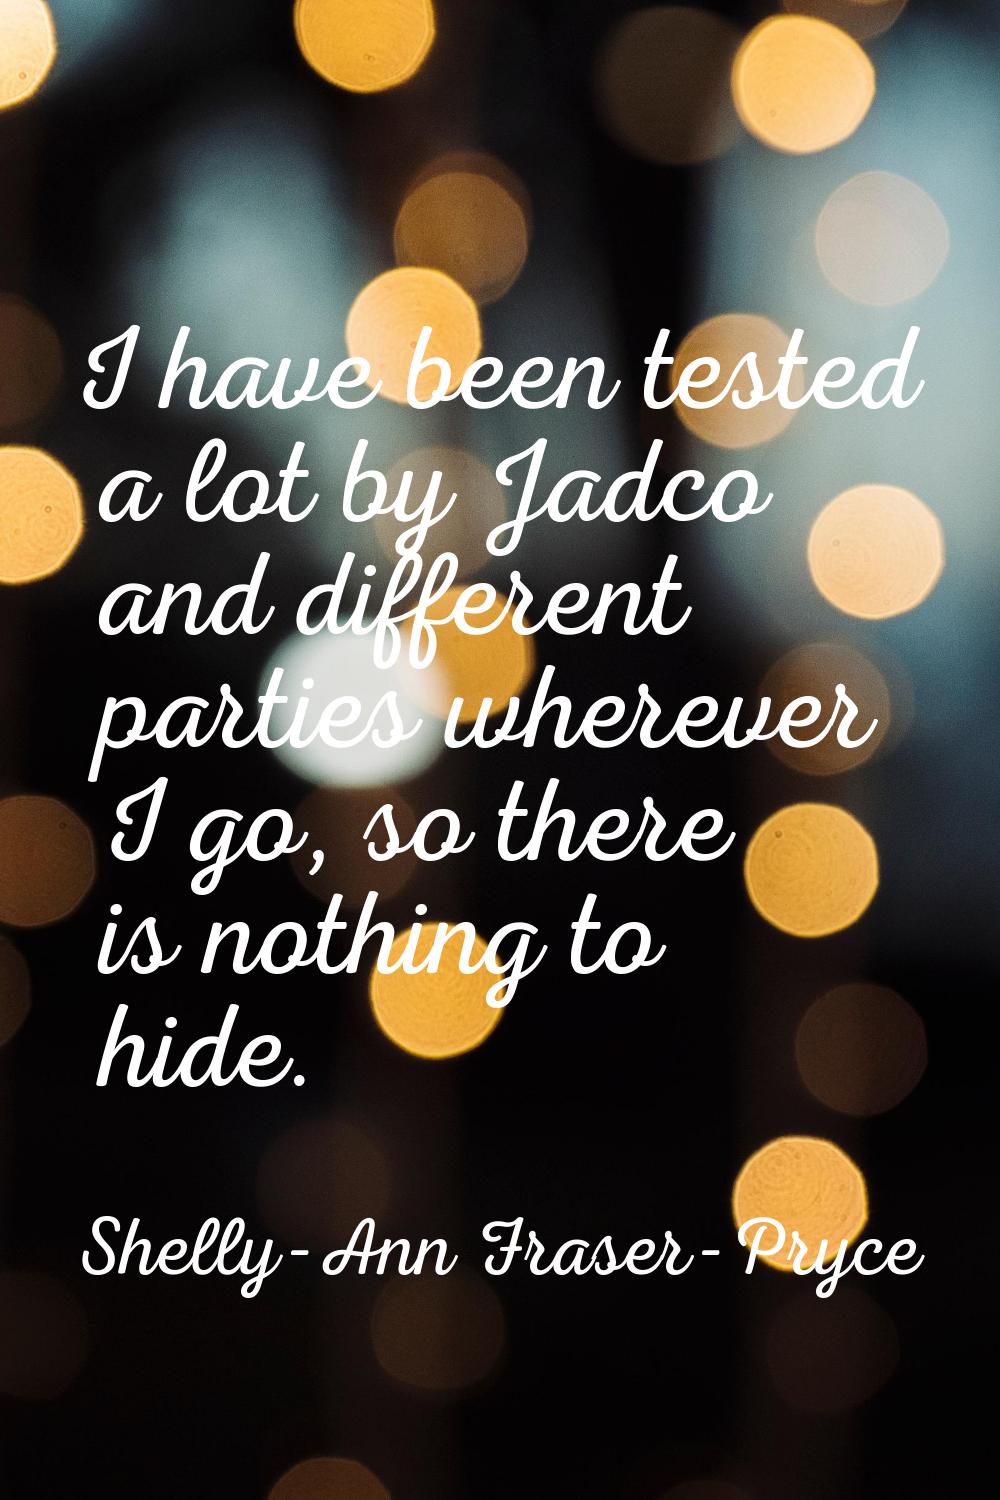 I have been tested a lot by Jadco and different parties wherever I go, so there is nothing to hide.